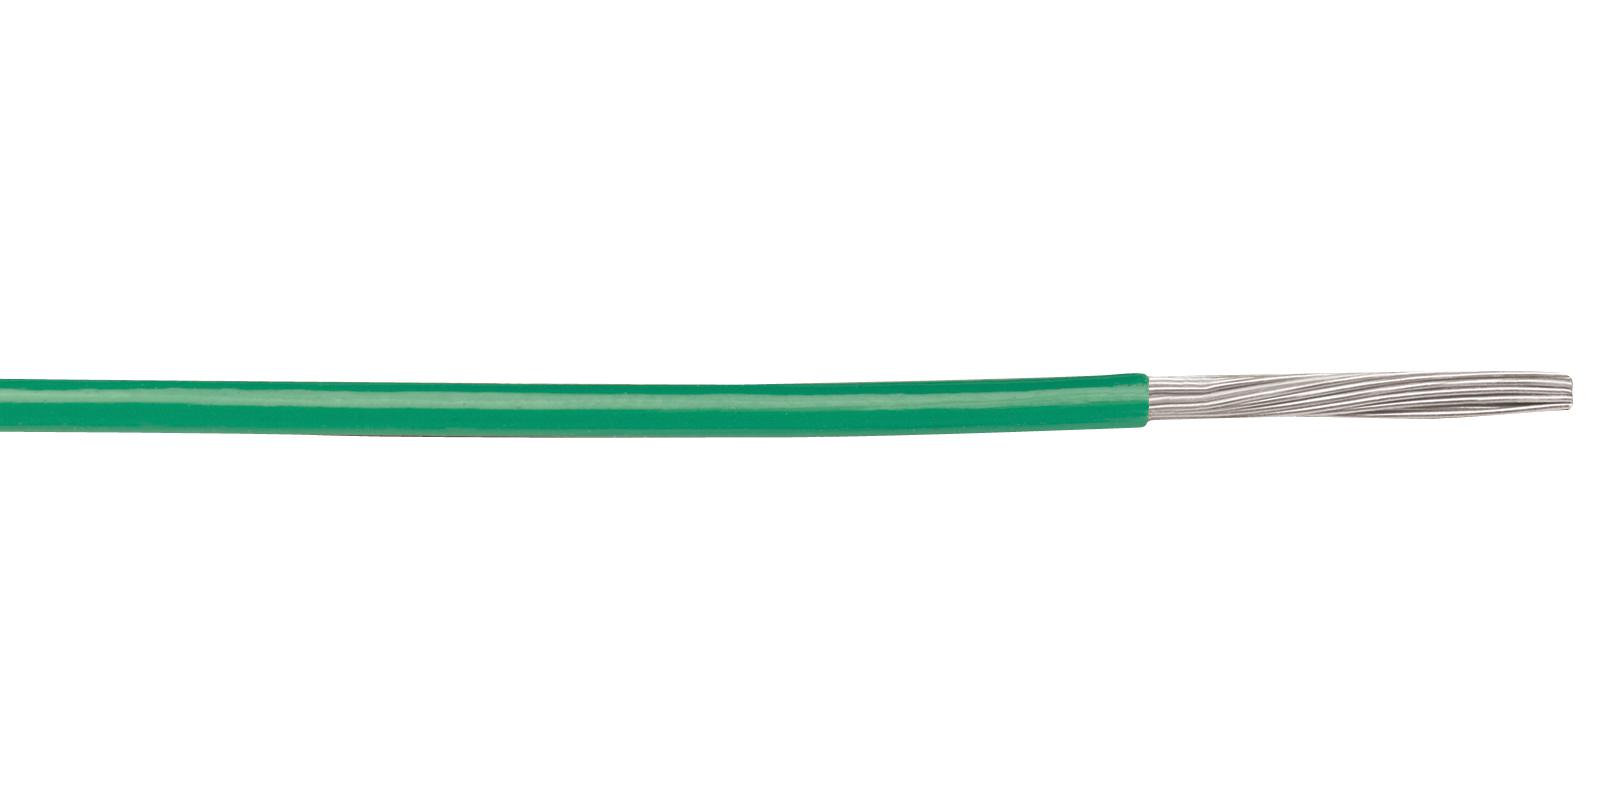 6820 GY001 HOOK-UP WIRE, 28AWG, GRN/YEL, 305M ALPHA WIRE